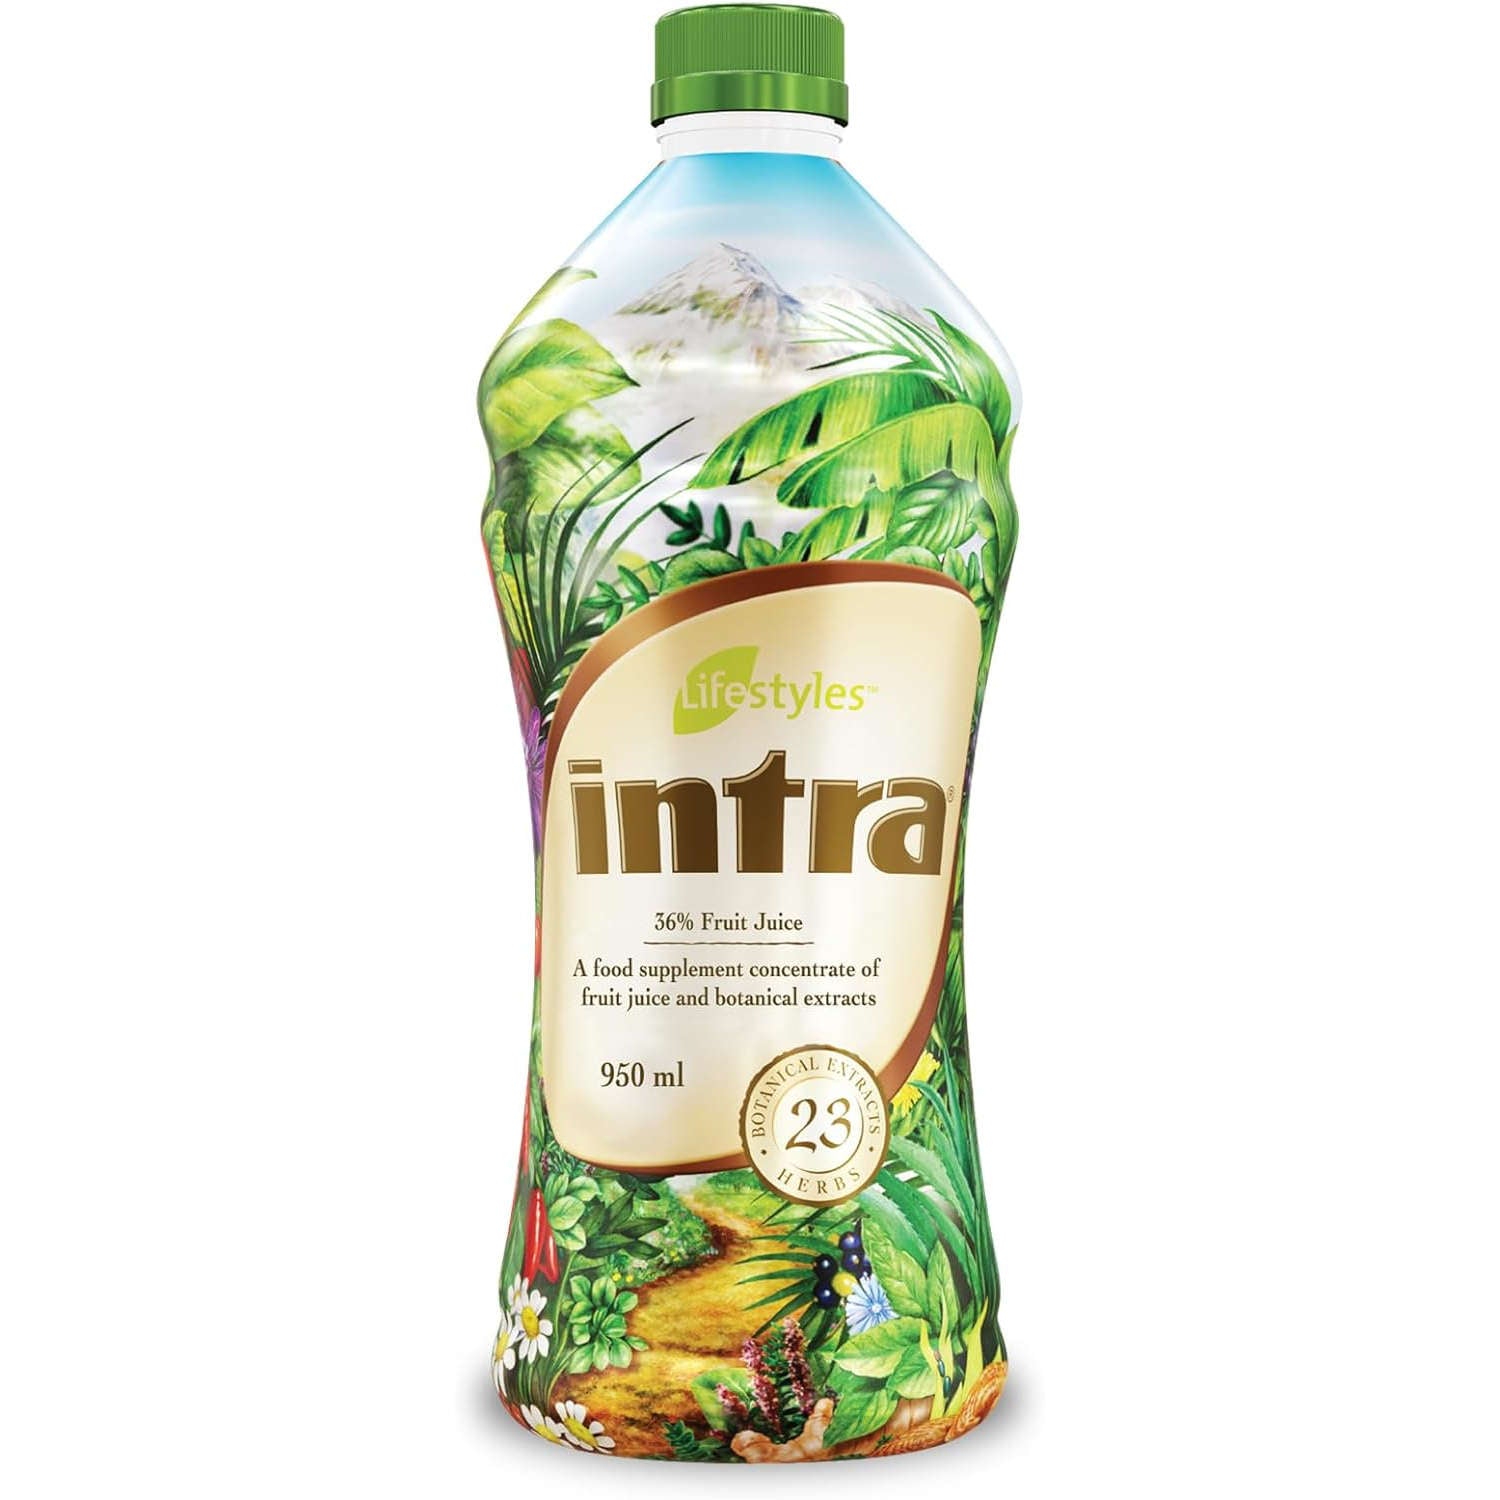 Intra Herbal Juice Drink - Immune Booster and Body Detox